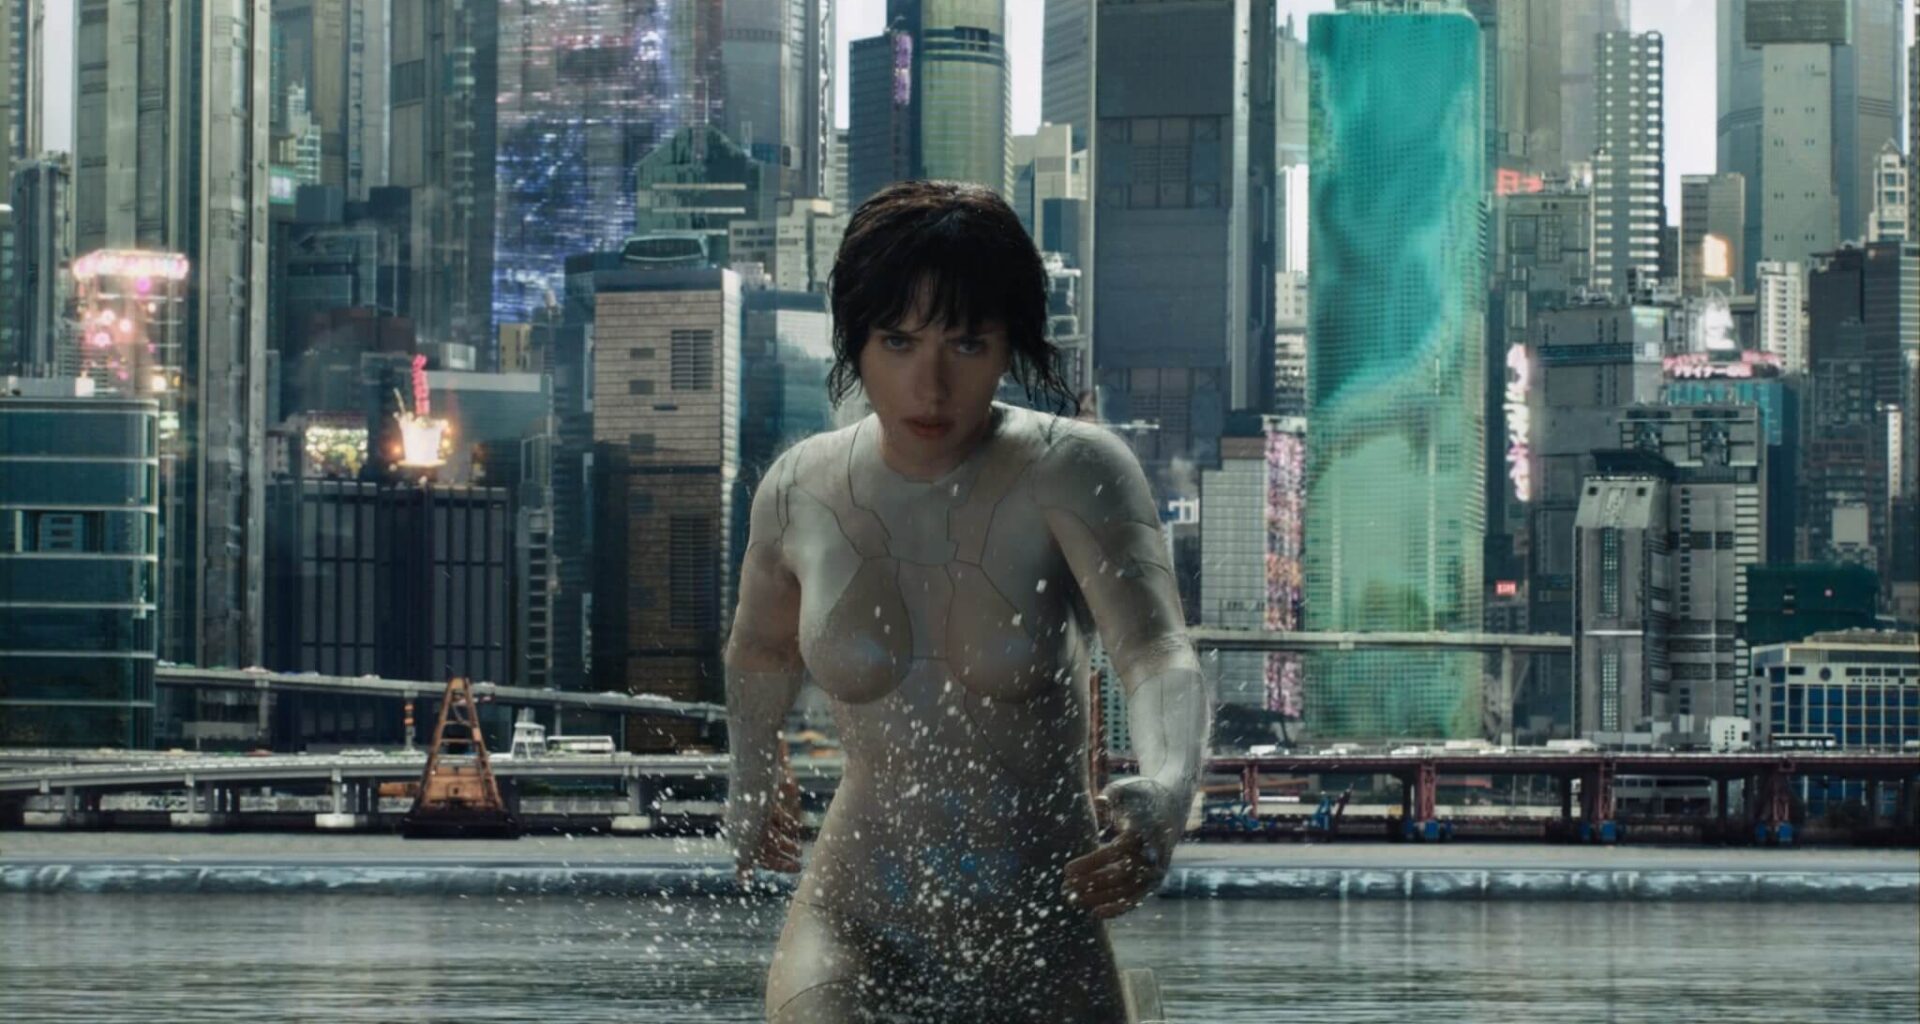 Ghost in the shell critica